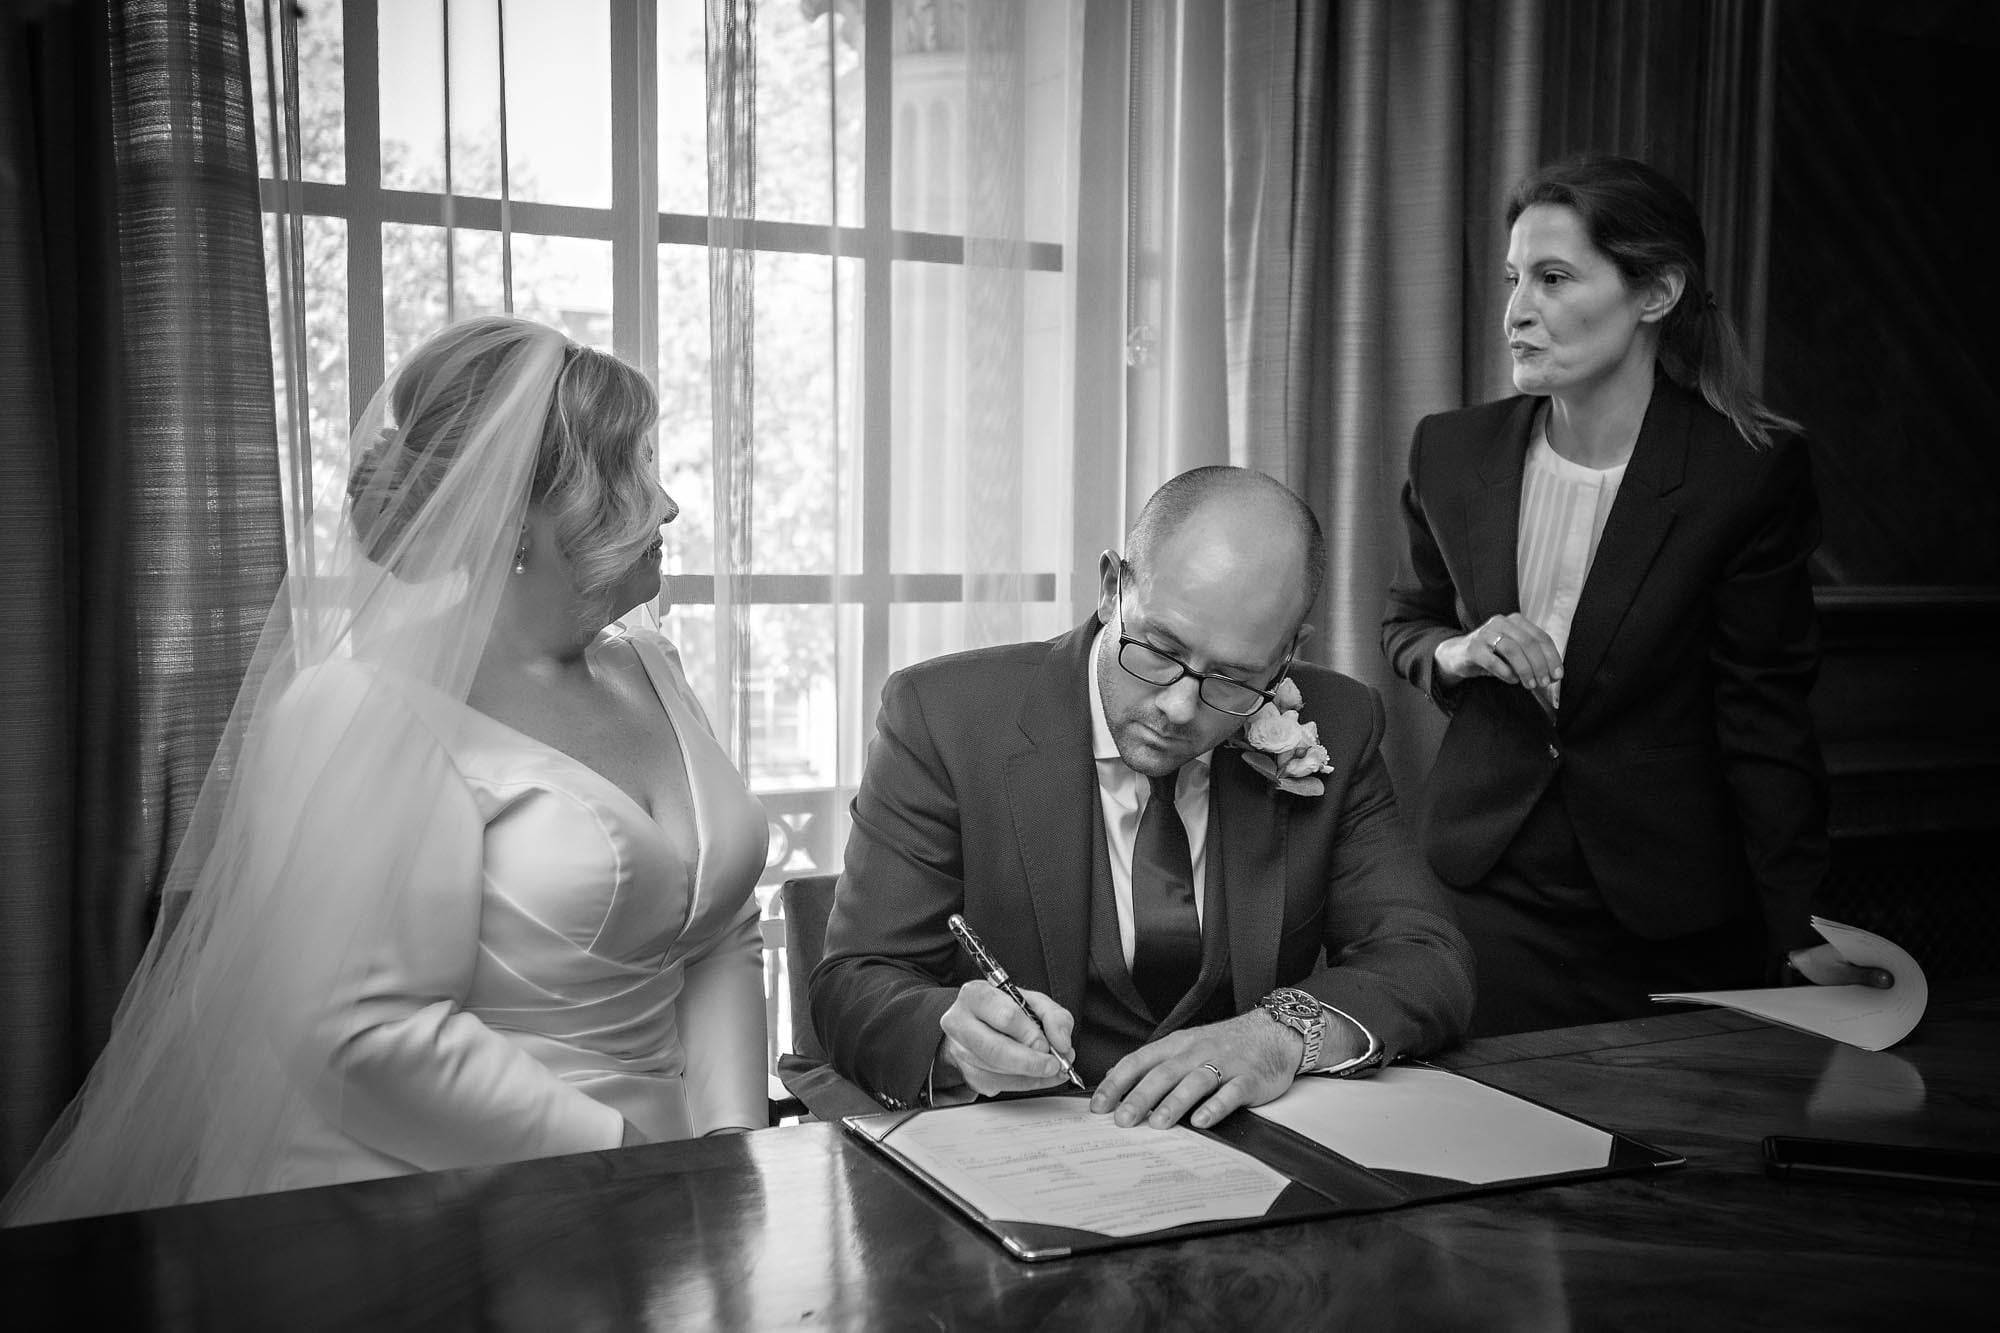 The groom seriously signs the regiaster the the bride and resistrar chat in Westminster Register Office